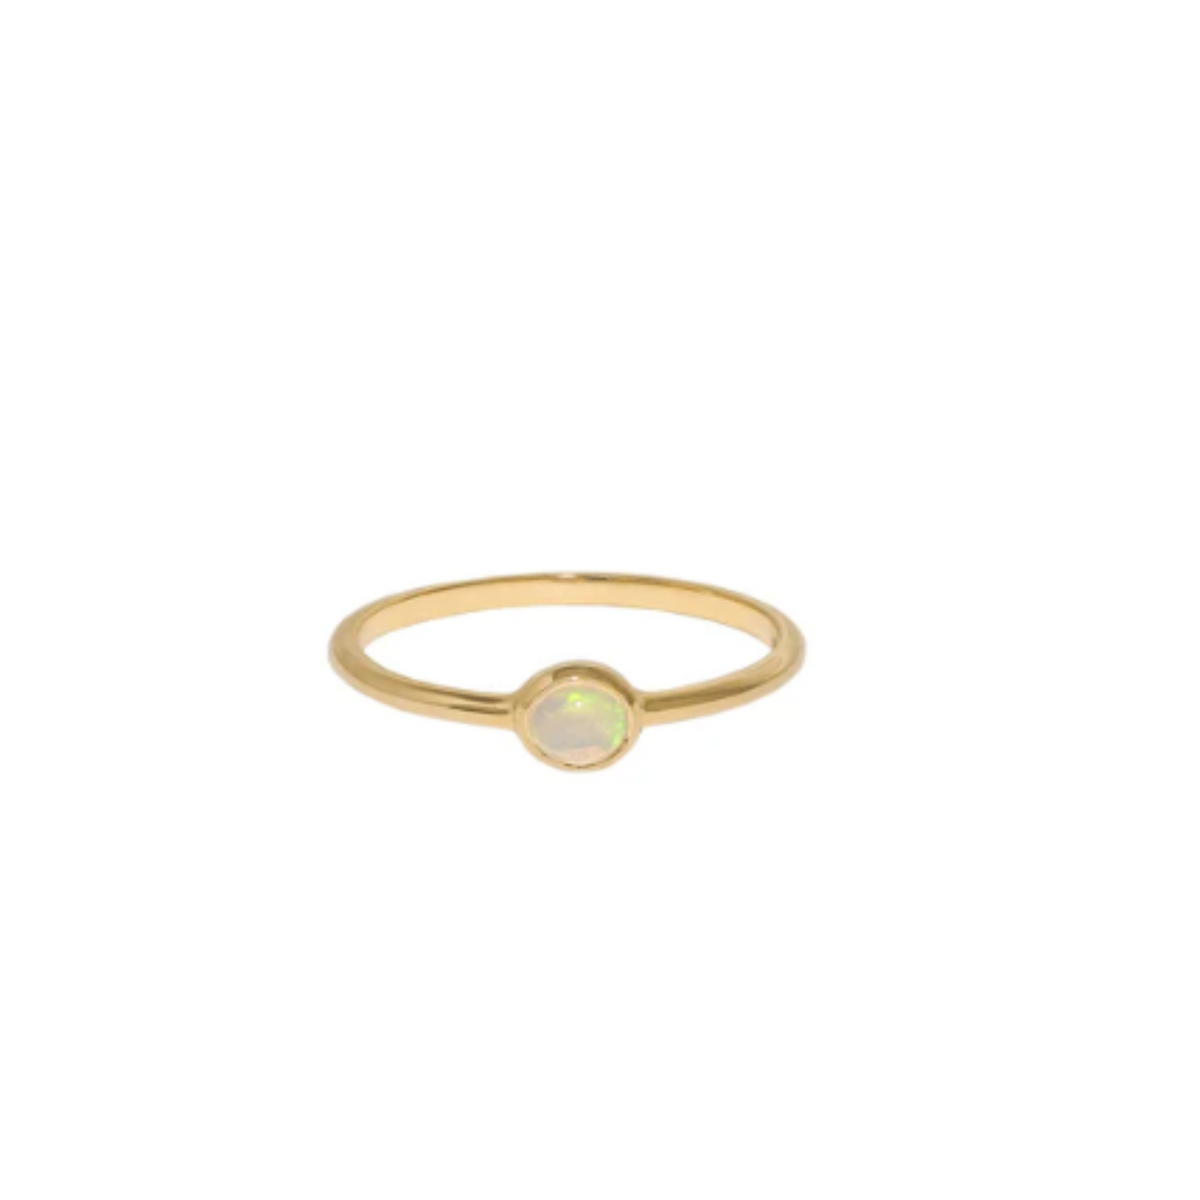 Cabochon Ring, 10K Gold And Opal